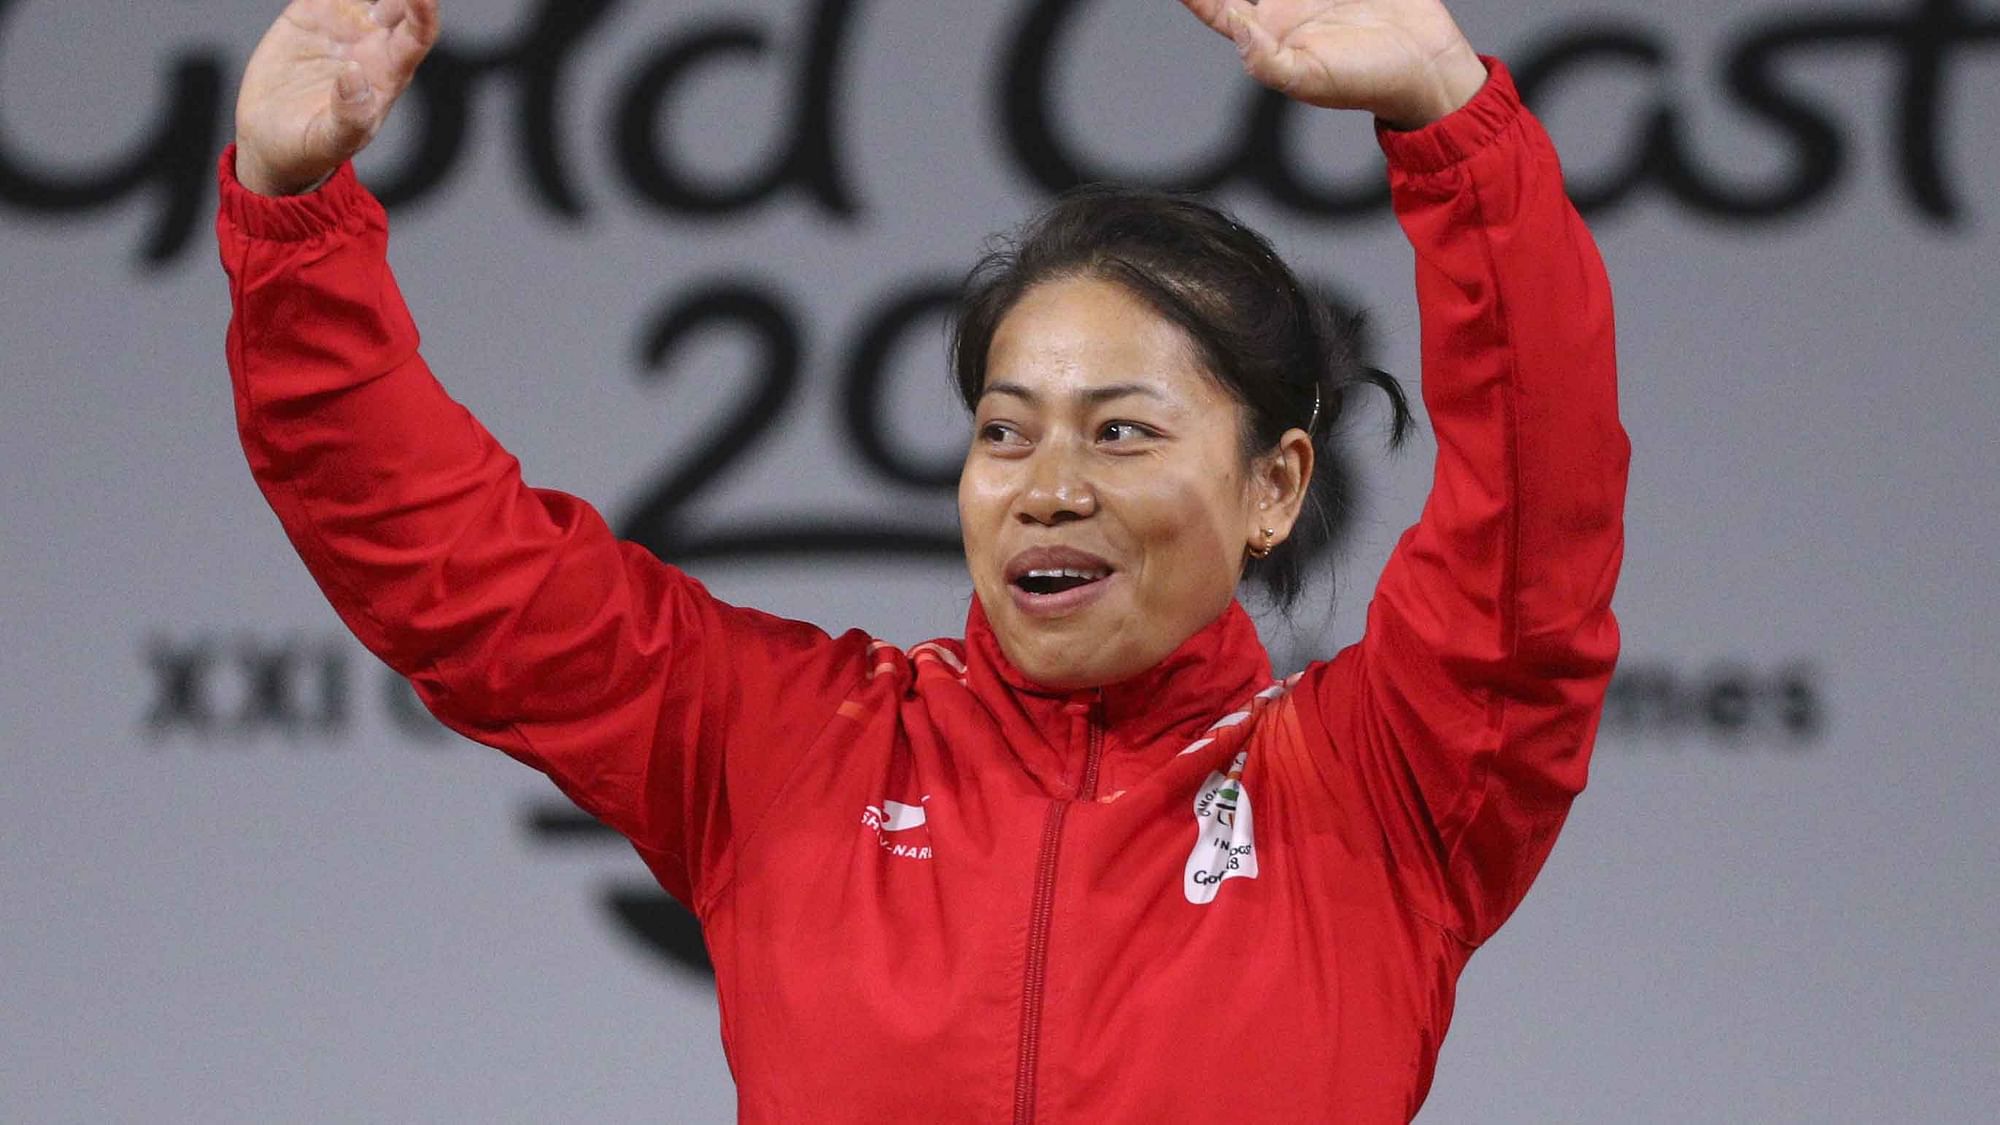 India’s women’s 53 kg weightlifting gold medalist Sanjita Chanu waves during the medal ceremony.